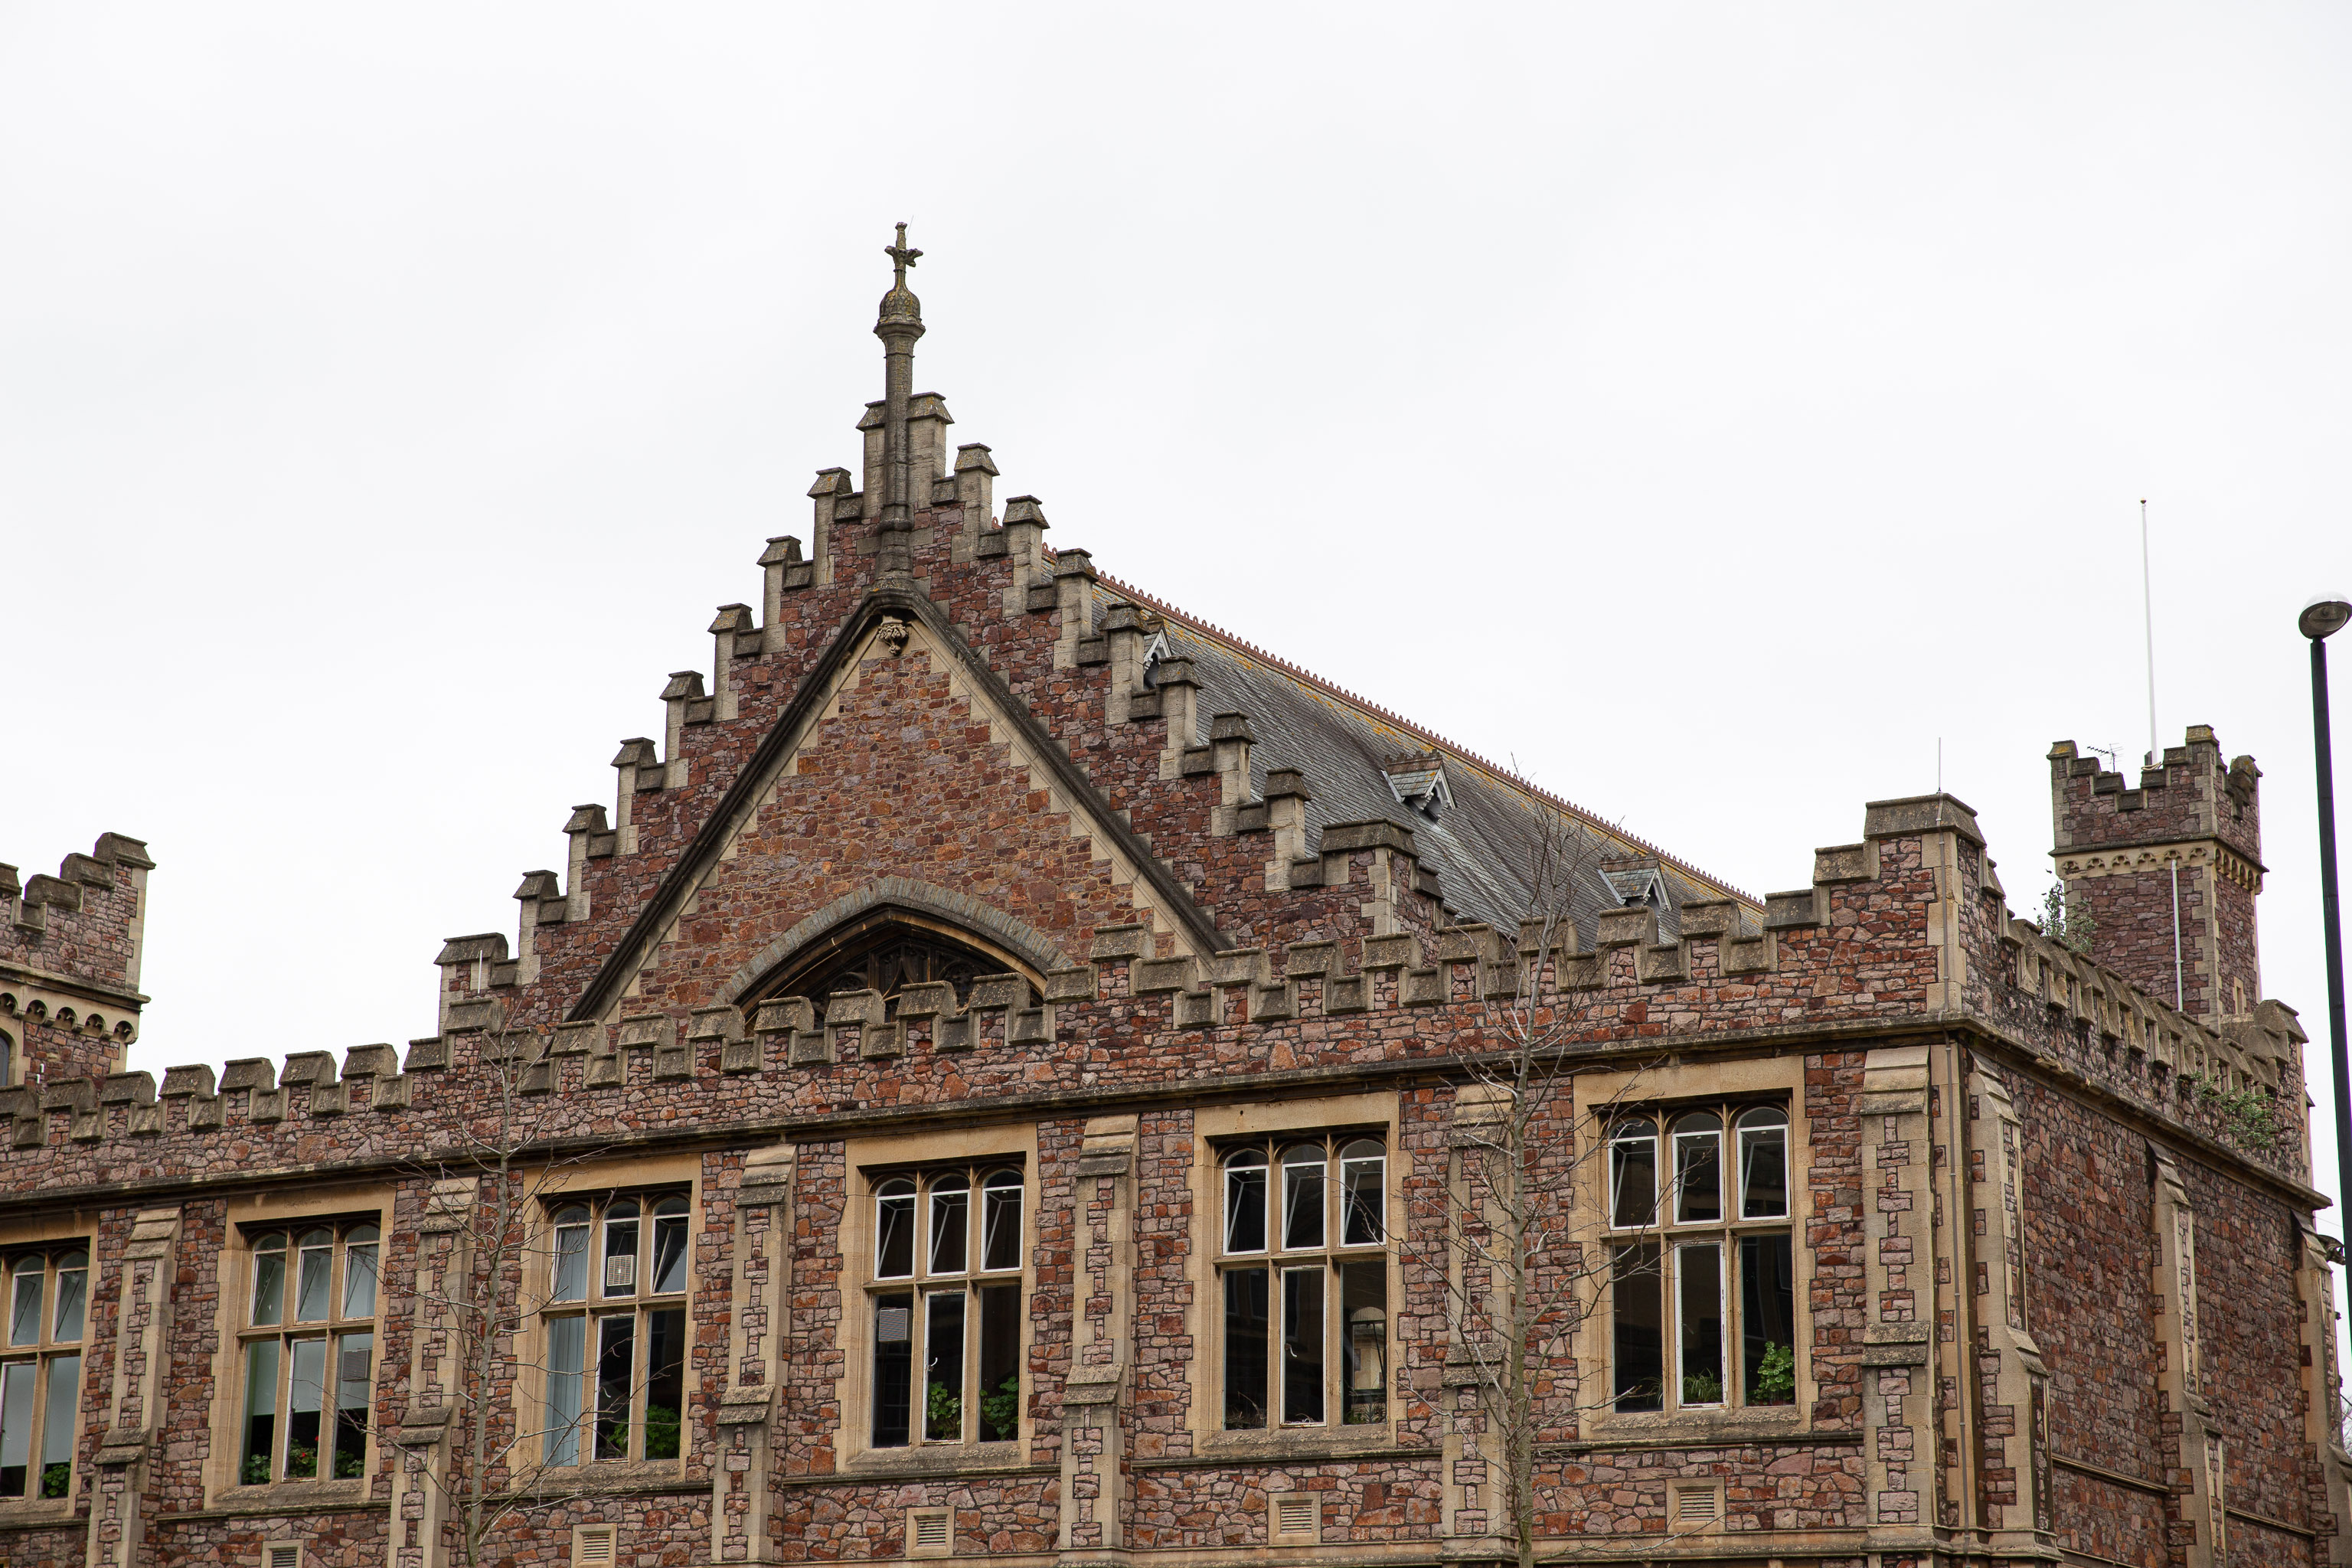 Crenellations and Stepped Gables 
